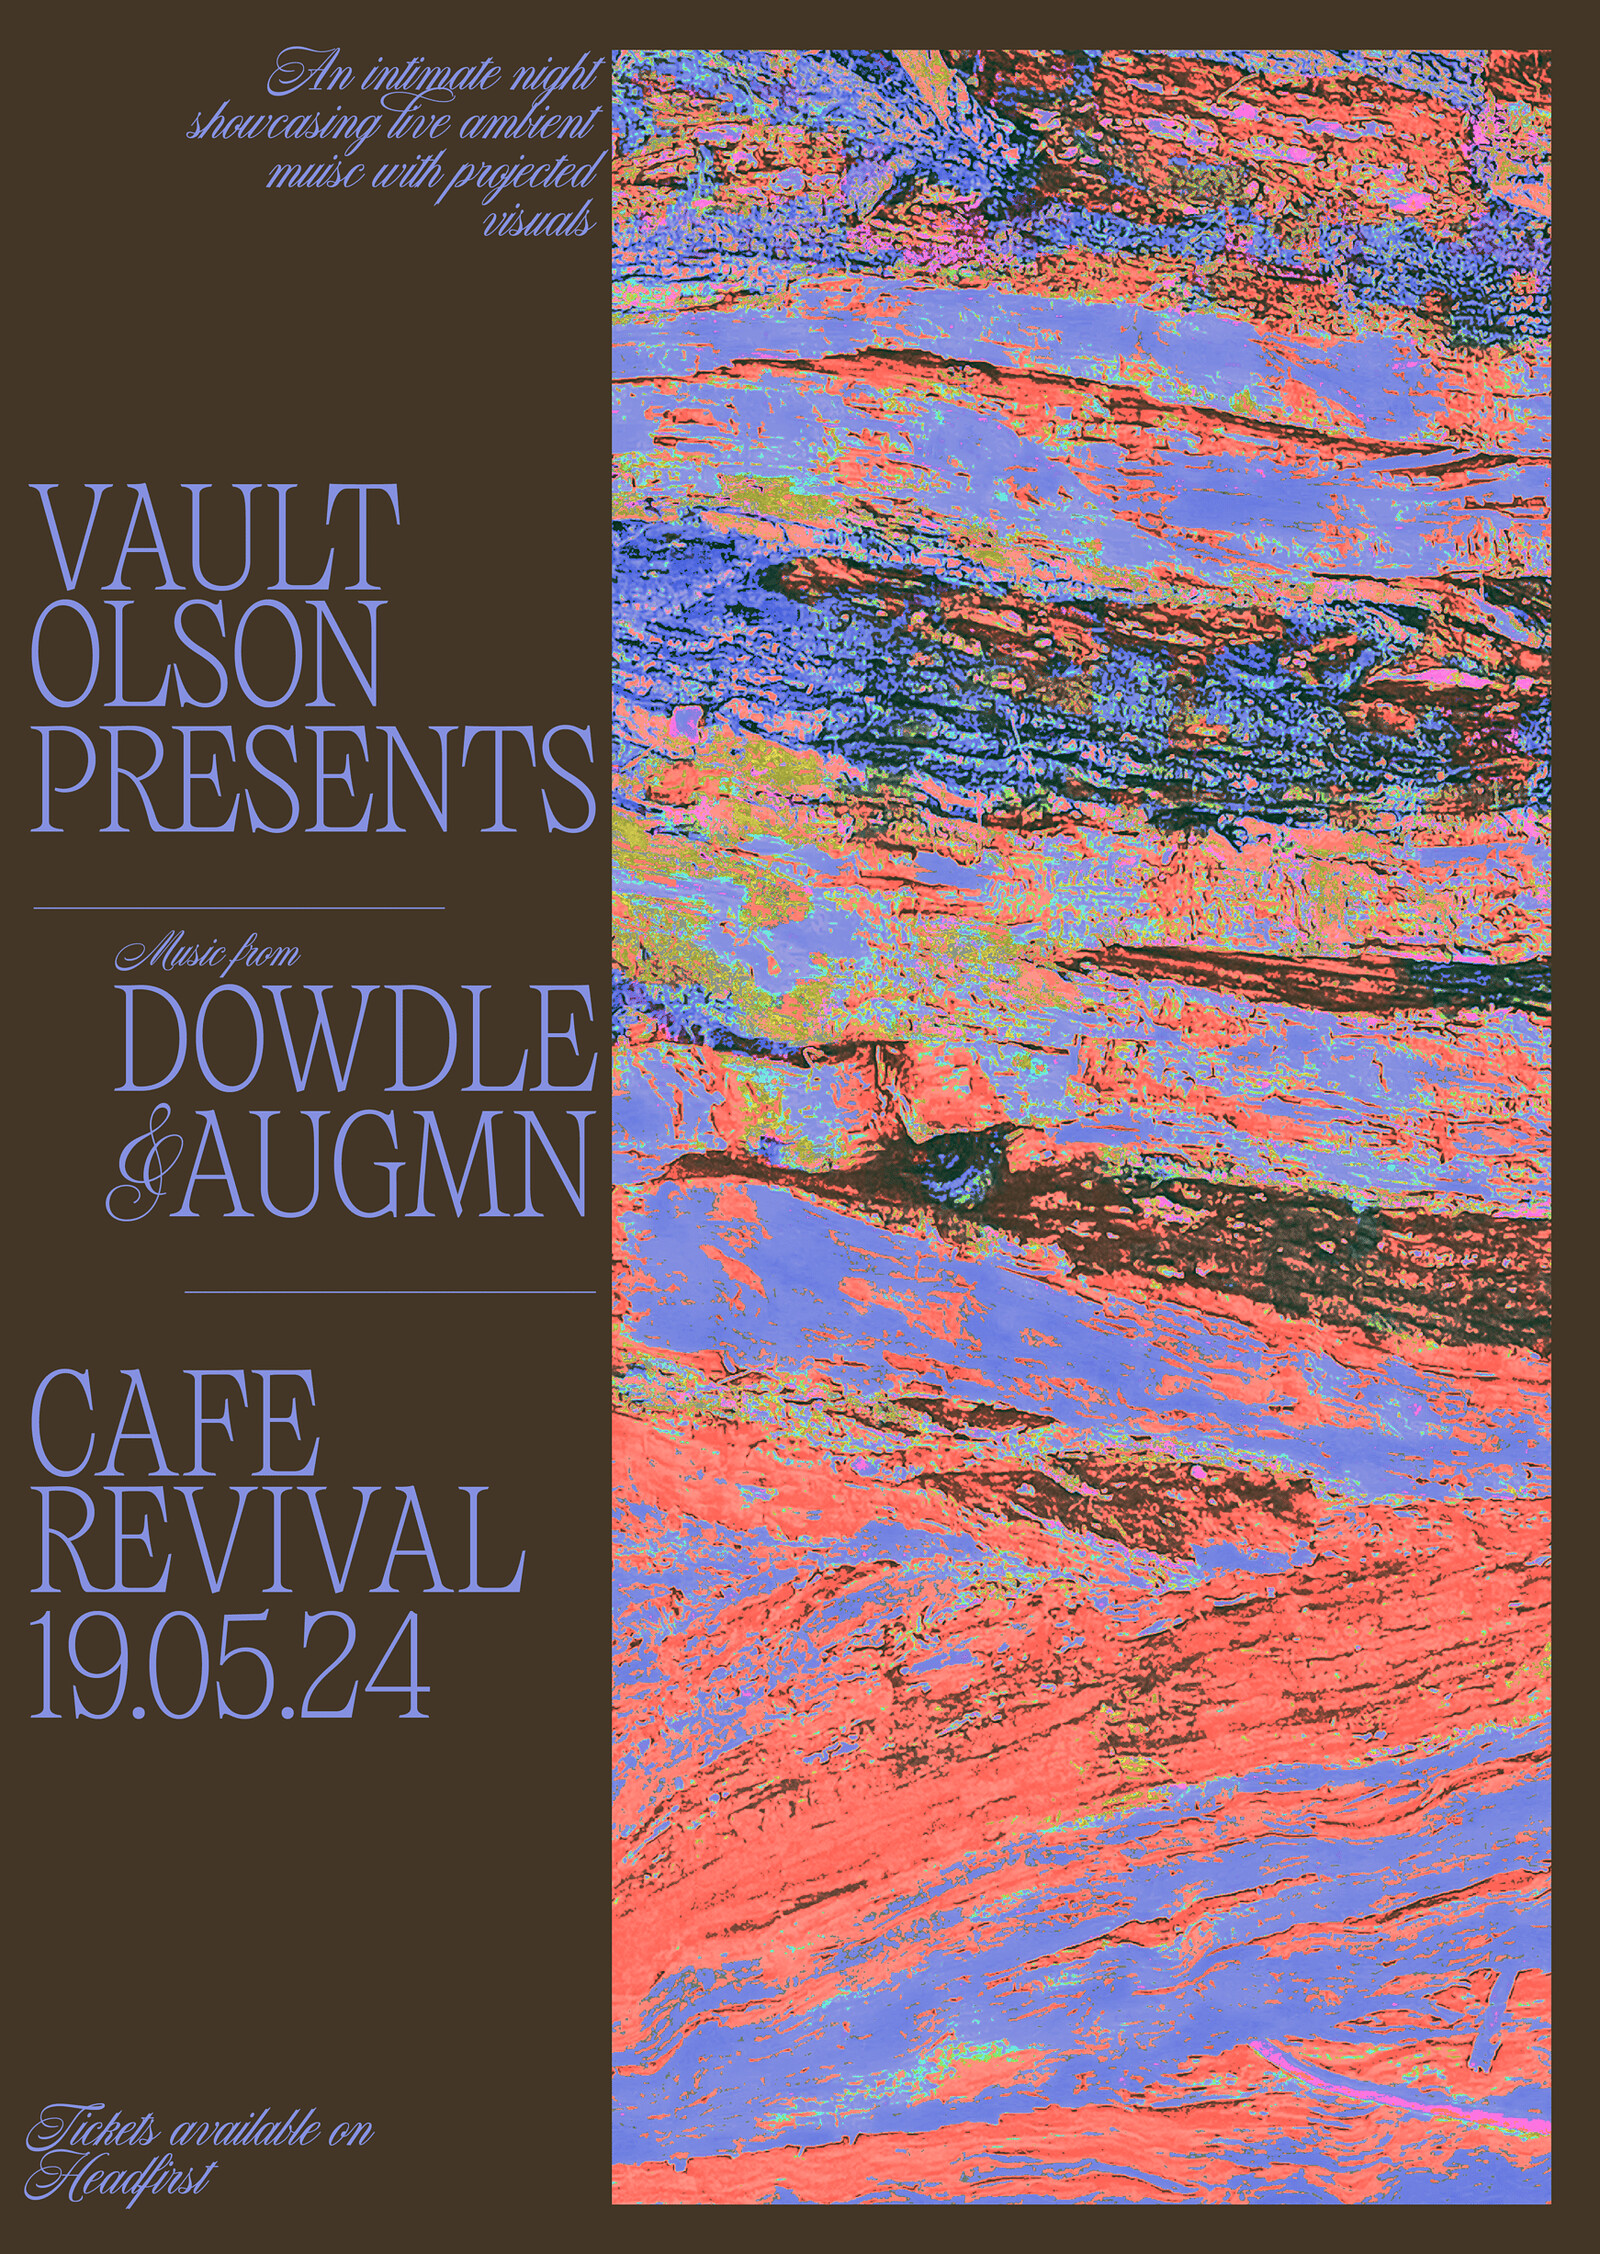 Vault Olson Presents an Ambient Exhibition at Cafe Revival